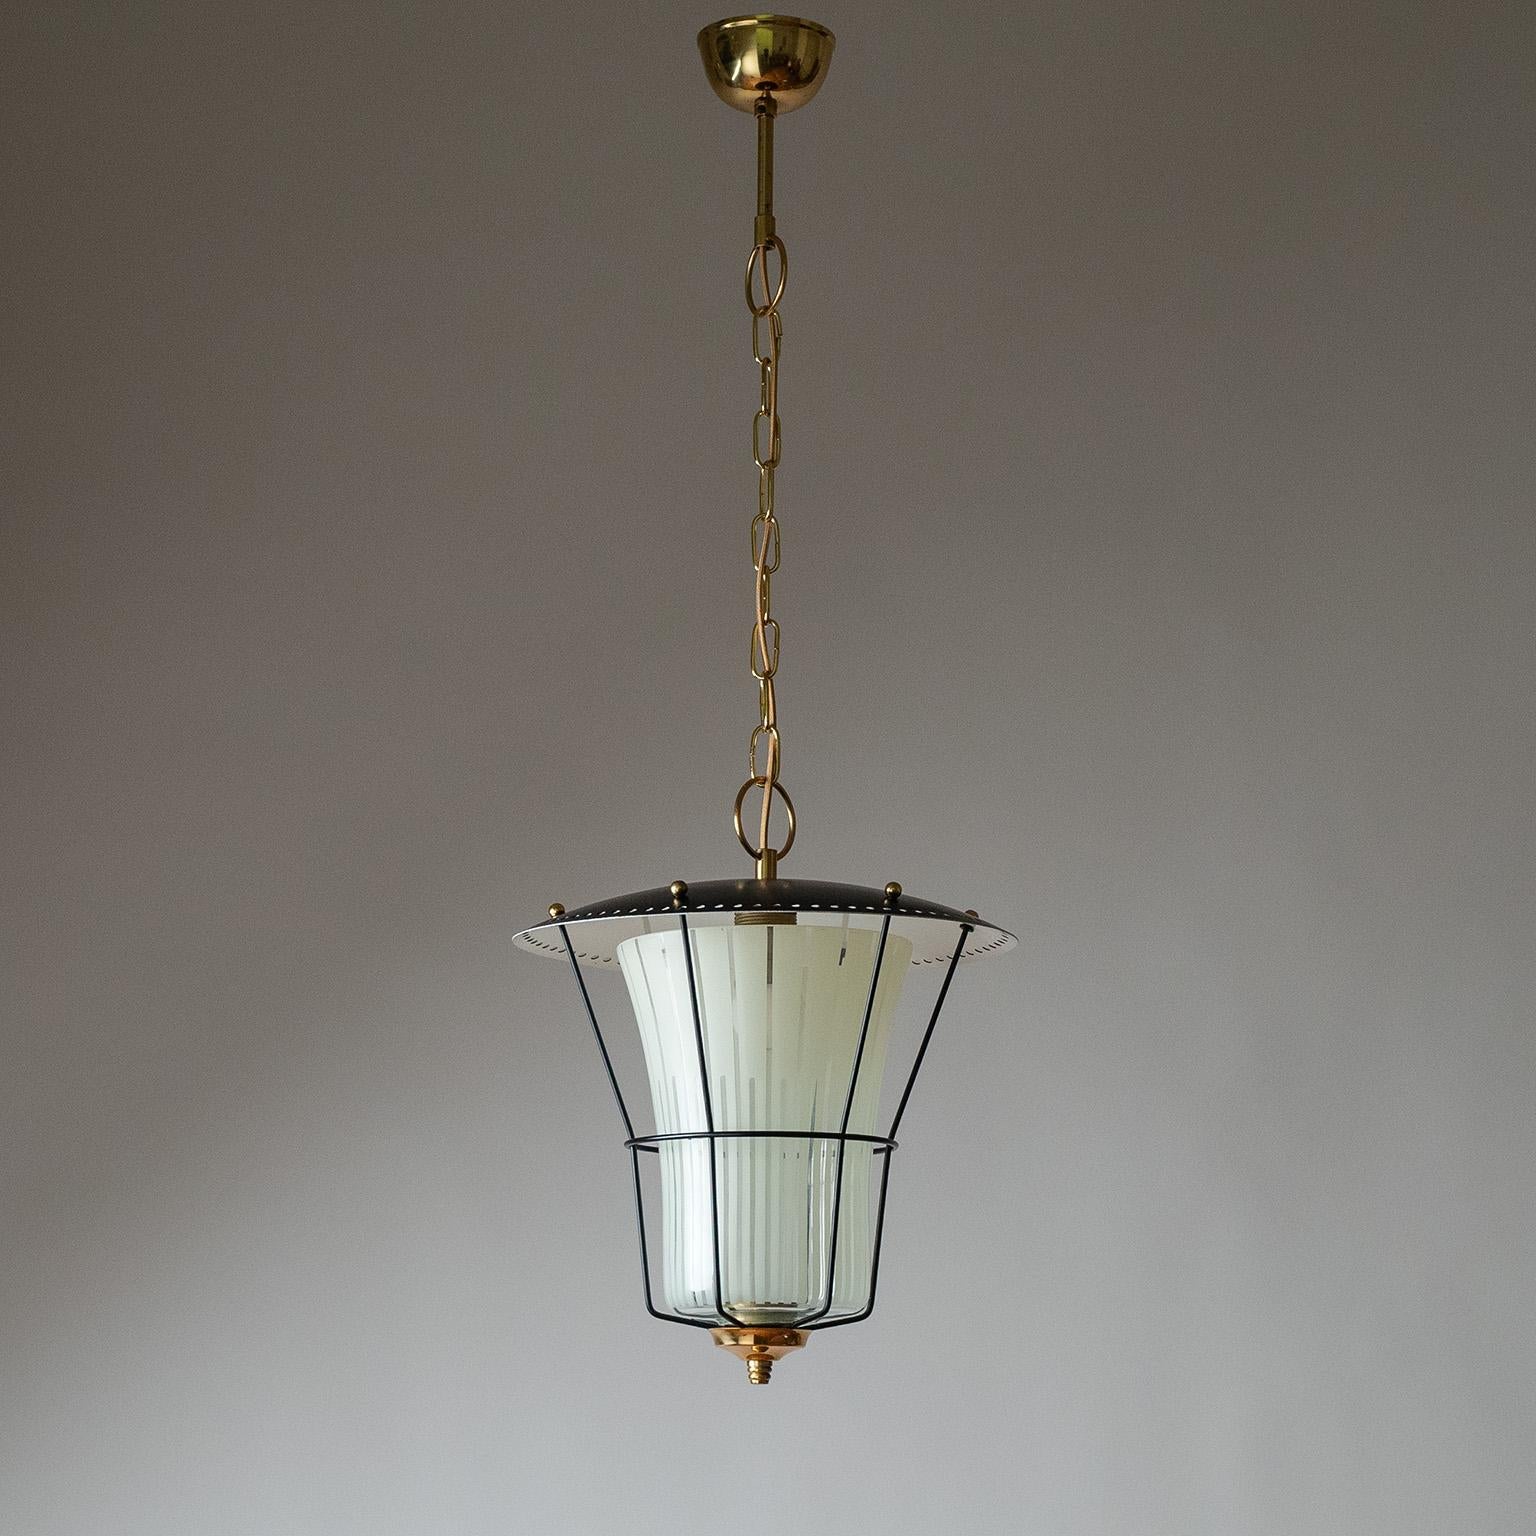 fine Mid-Century Modern lantern from the 1950s. Pierced shade with a delicate cage structure which houses a down glass diffuser with off-white enameled stripes. Very good original condition with minimal patina. One original brass E27 socket with new